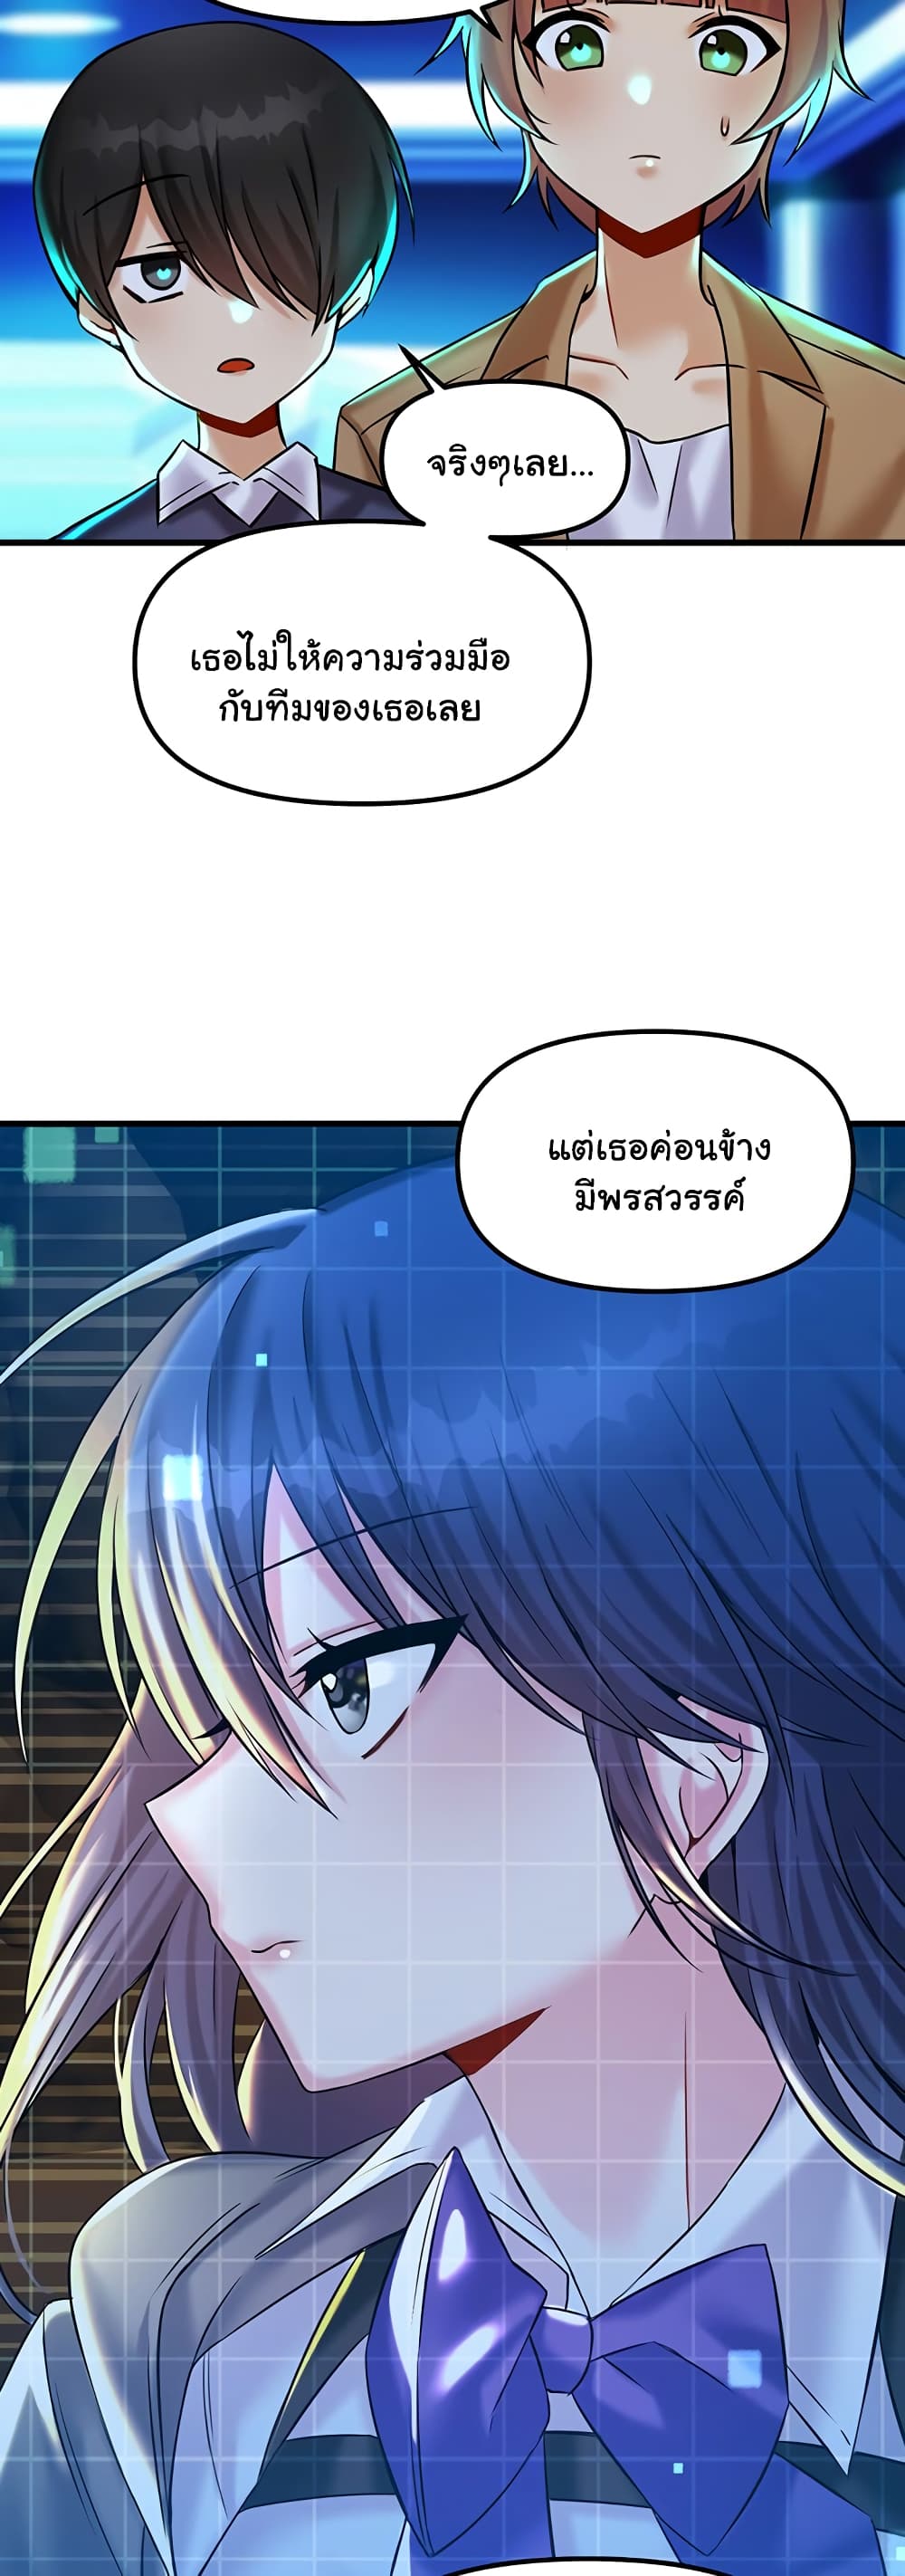 Trapped in the Academy’s Eroge 22-22